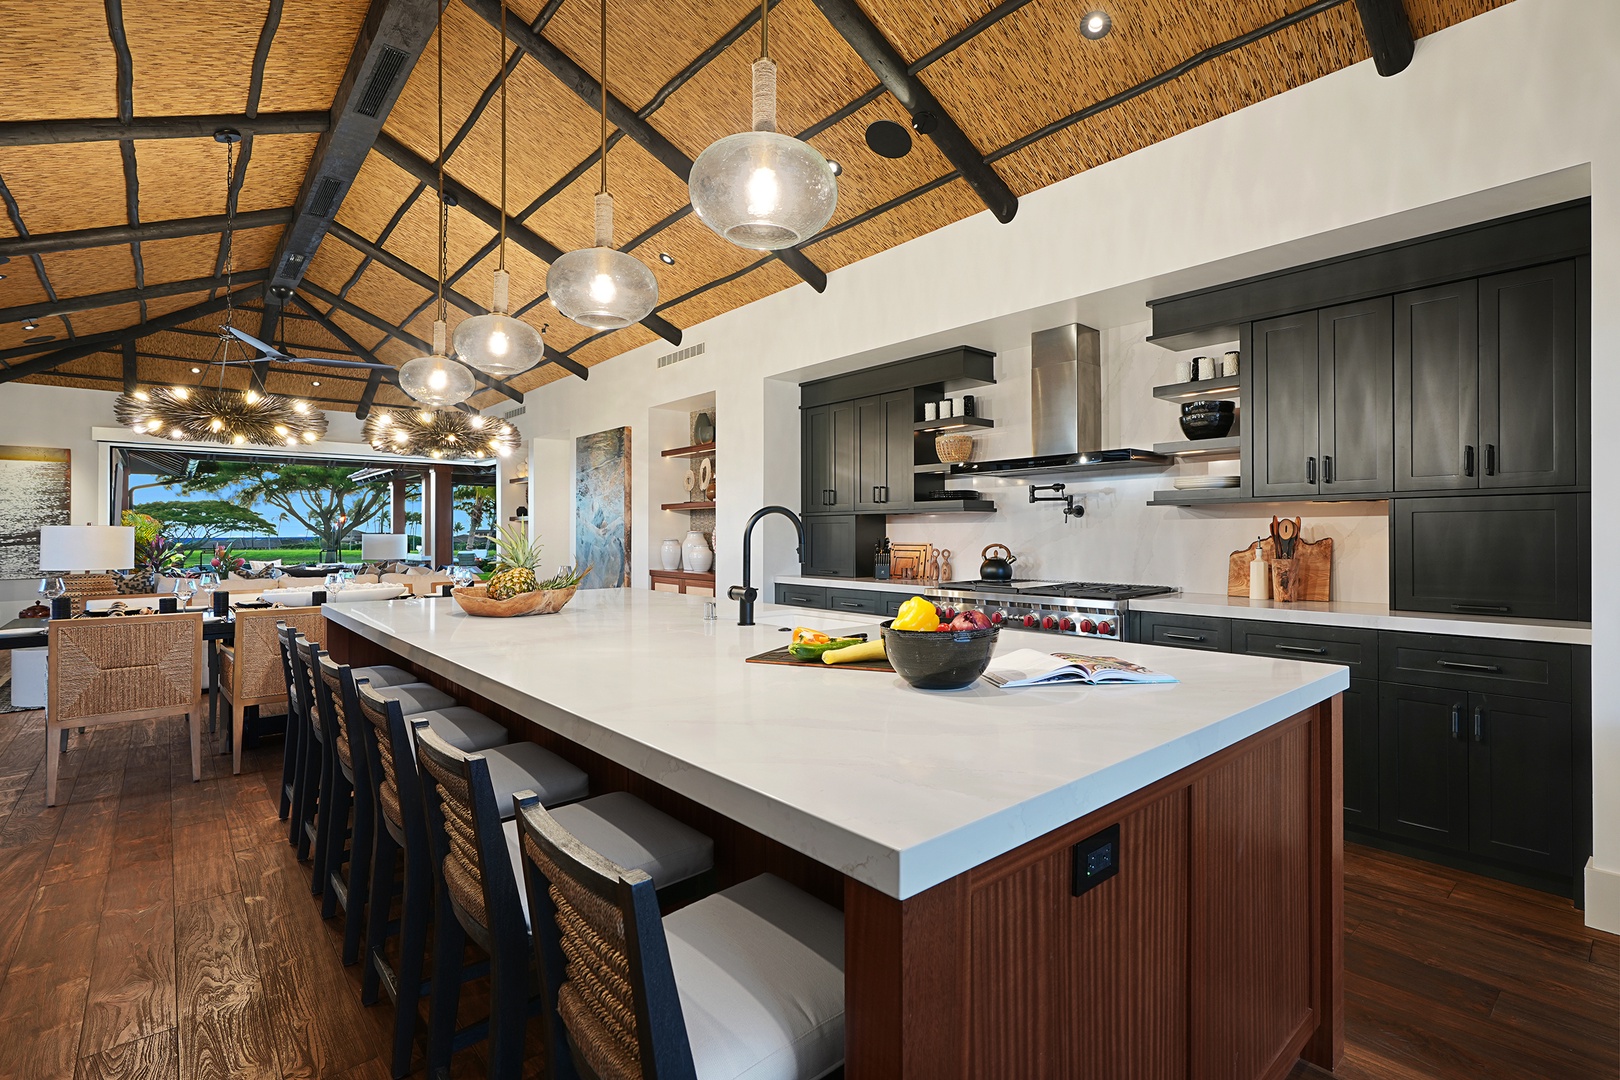 Koloa Vacation Rentals, Hale Pakika at Kukui'ula - A chef's haven with a spacious island, state-of-the-art appliances, and sleek breakfast bar for unforgettable dining experiences.